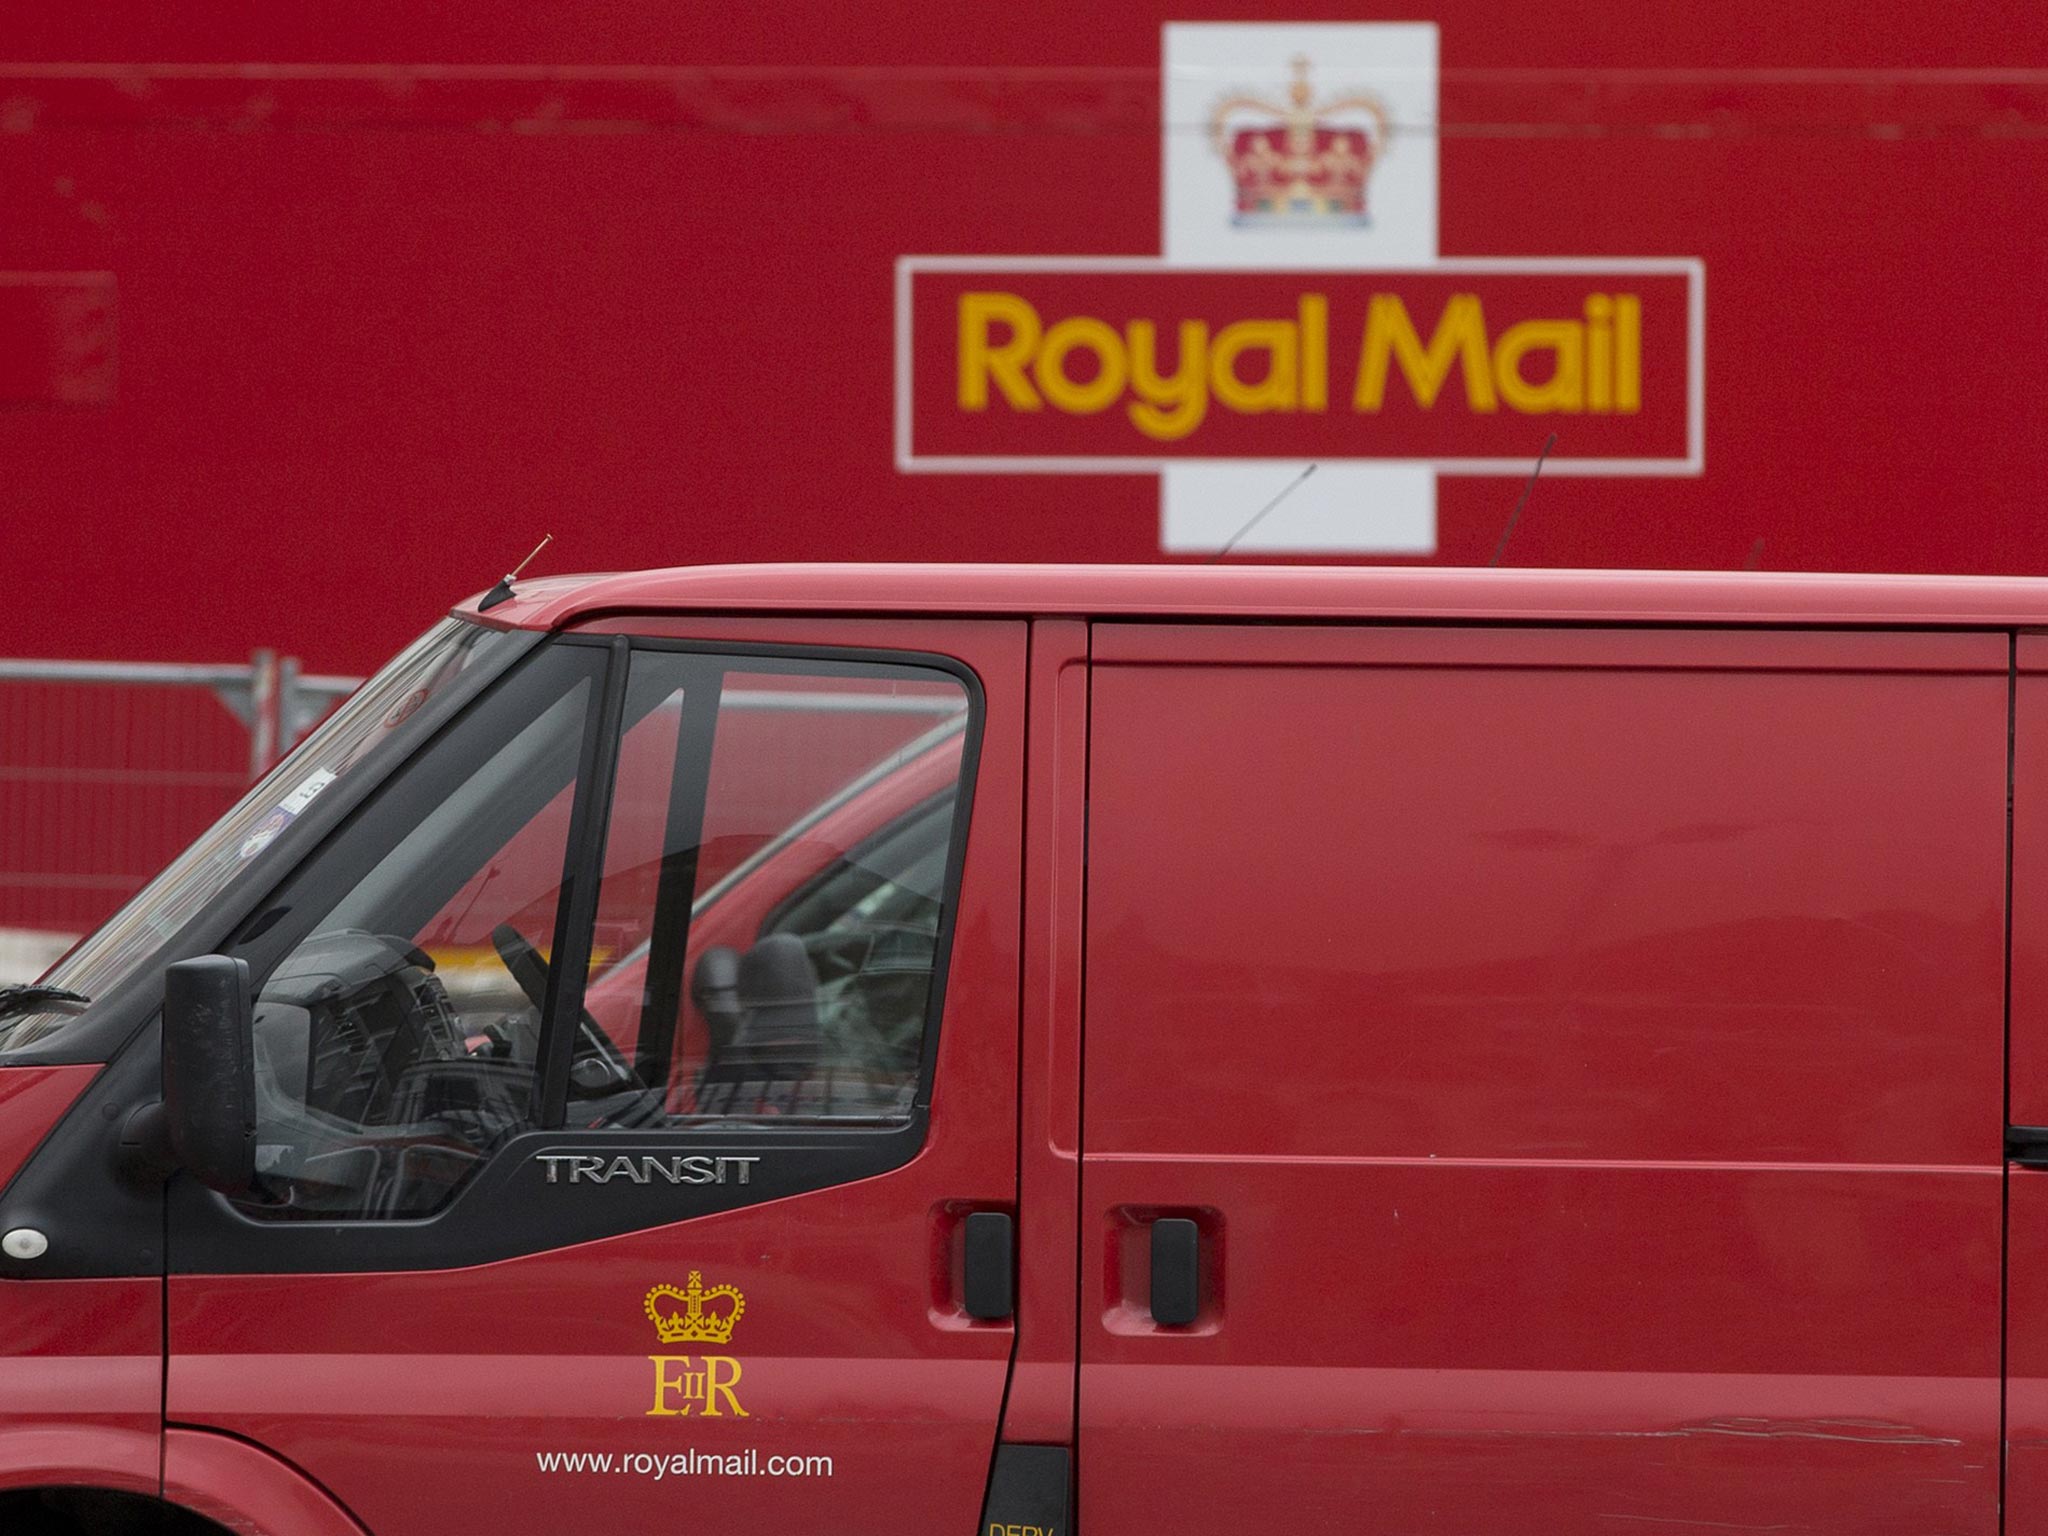 Royal Mail will be valued at up to £3.3 billion when its controversial privatisation takes place next month